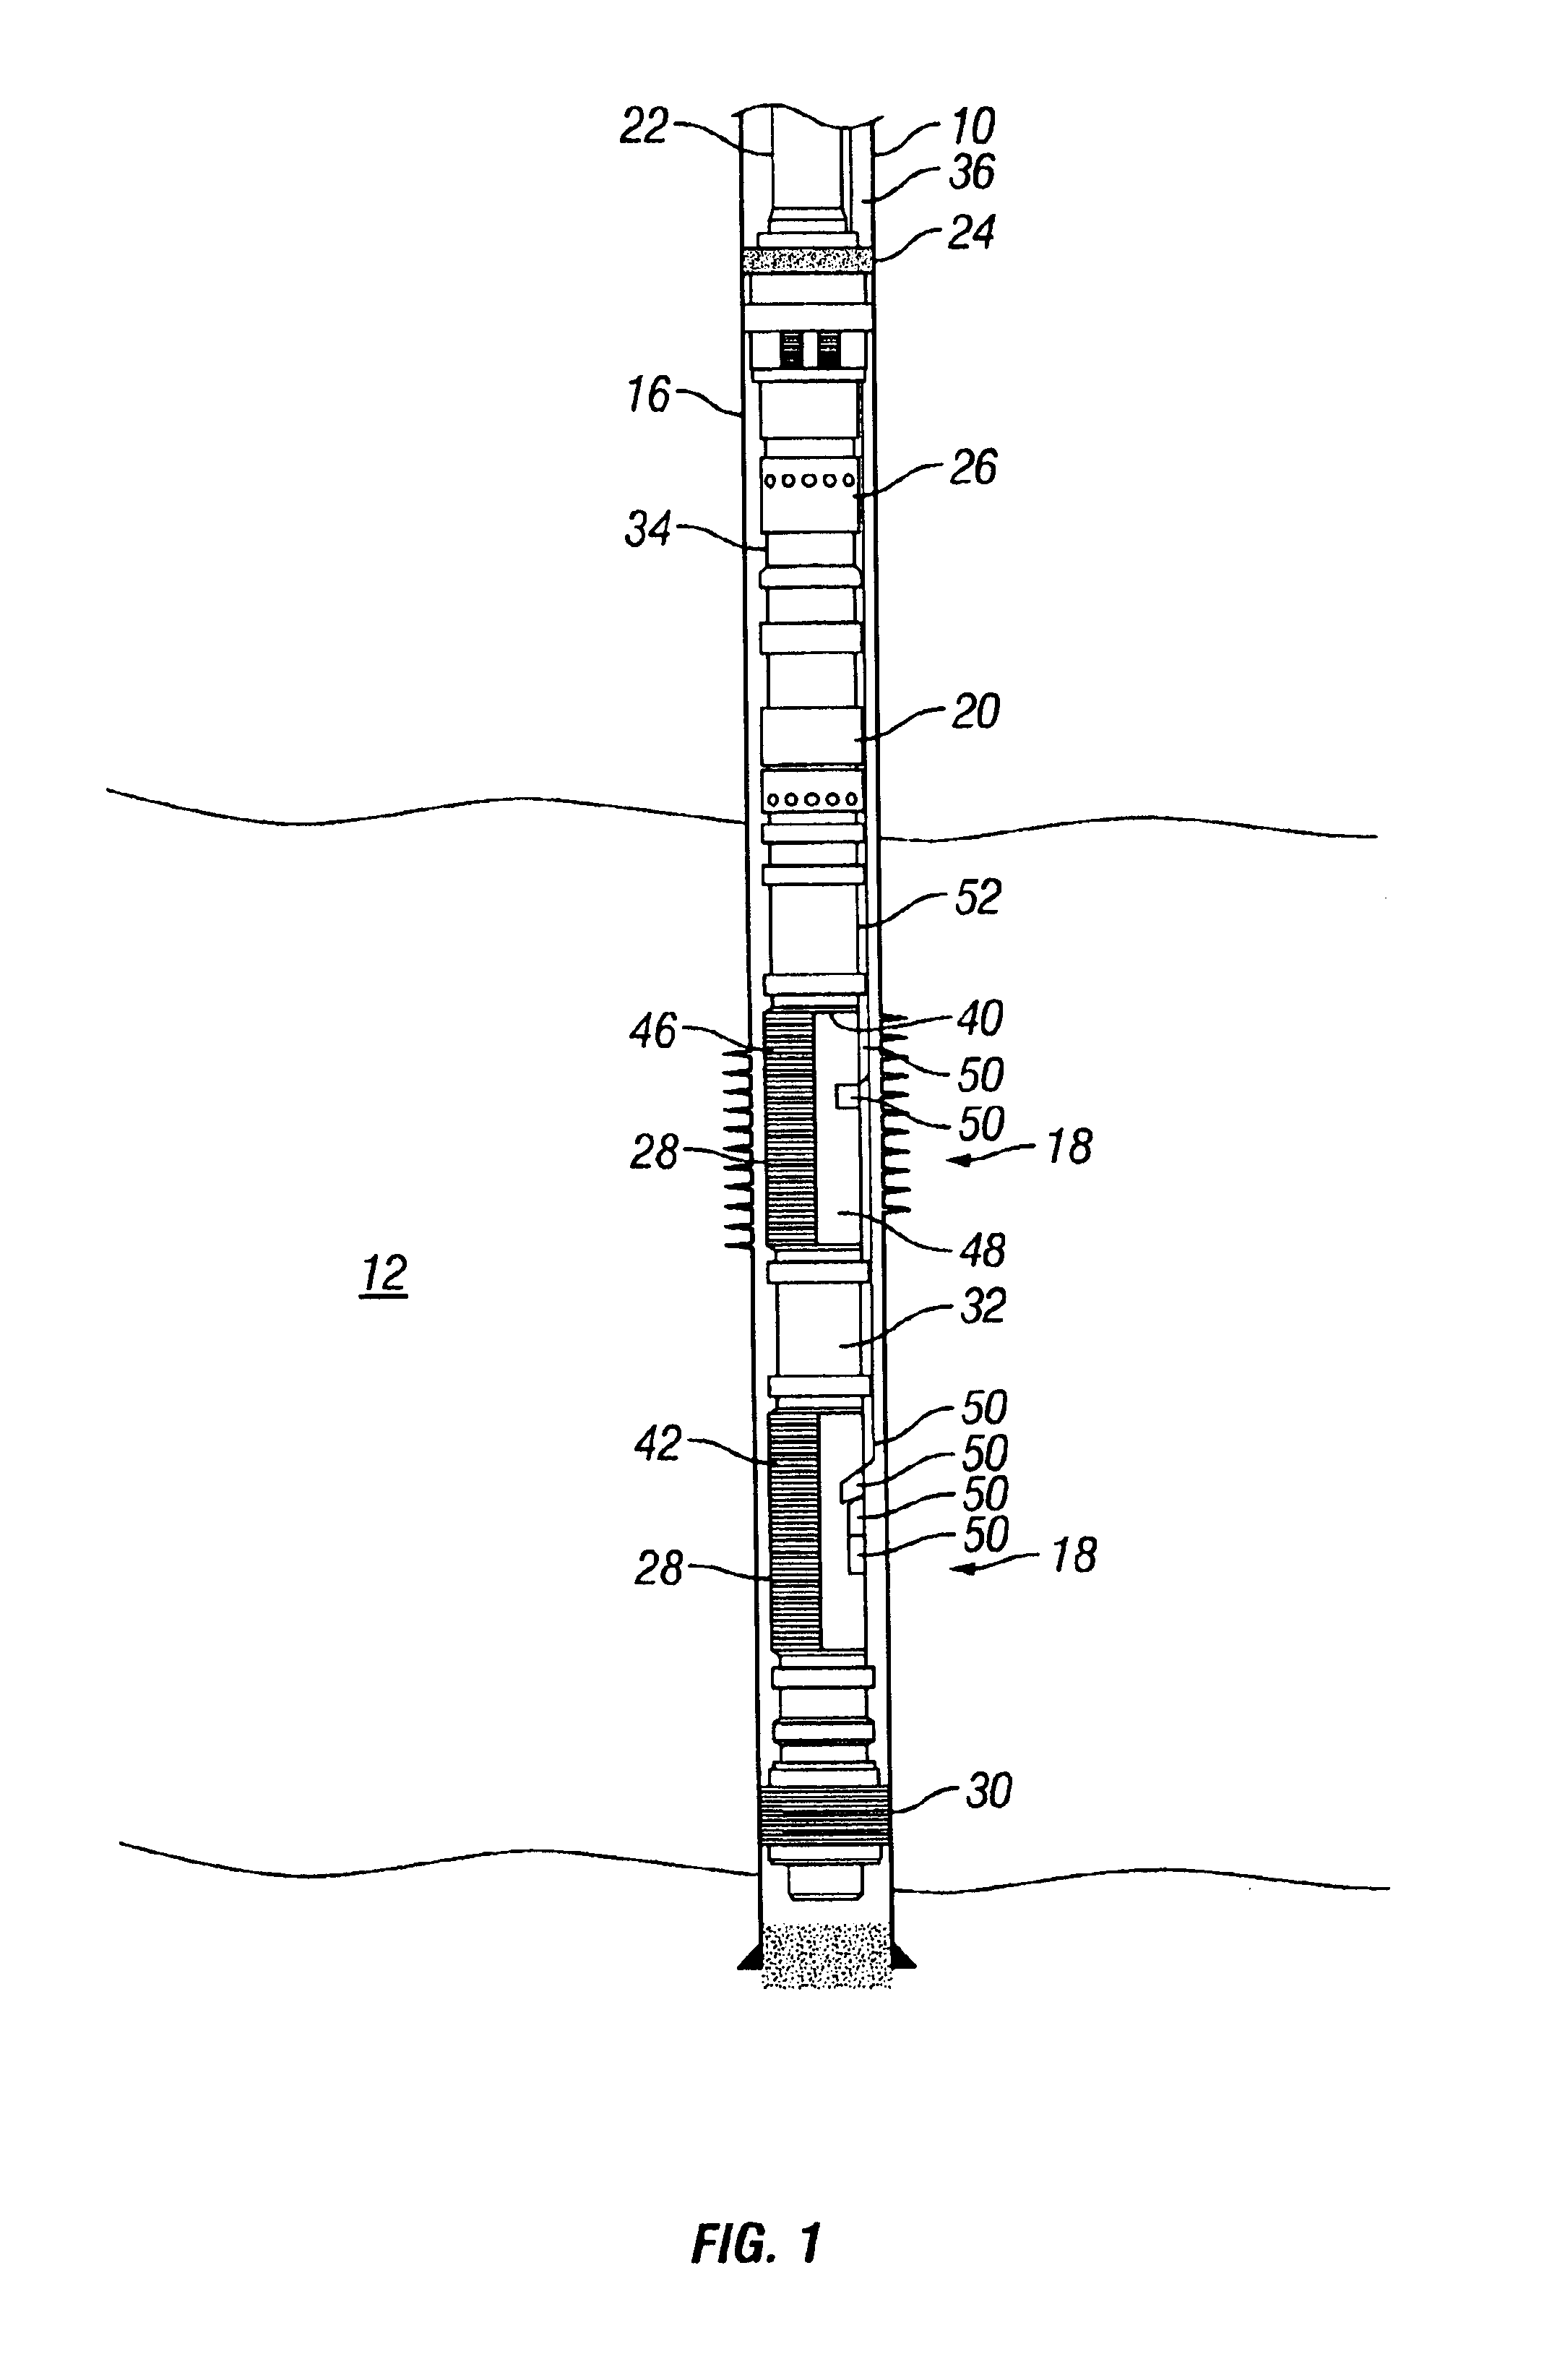 Screen and method having a partial screen wrap